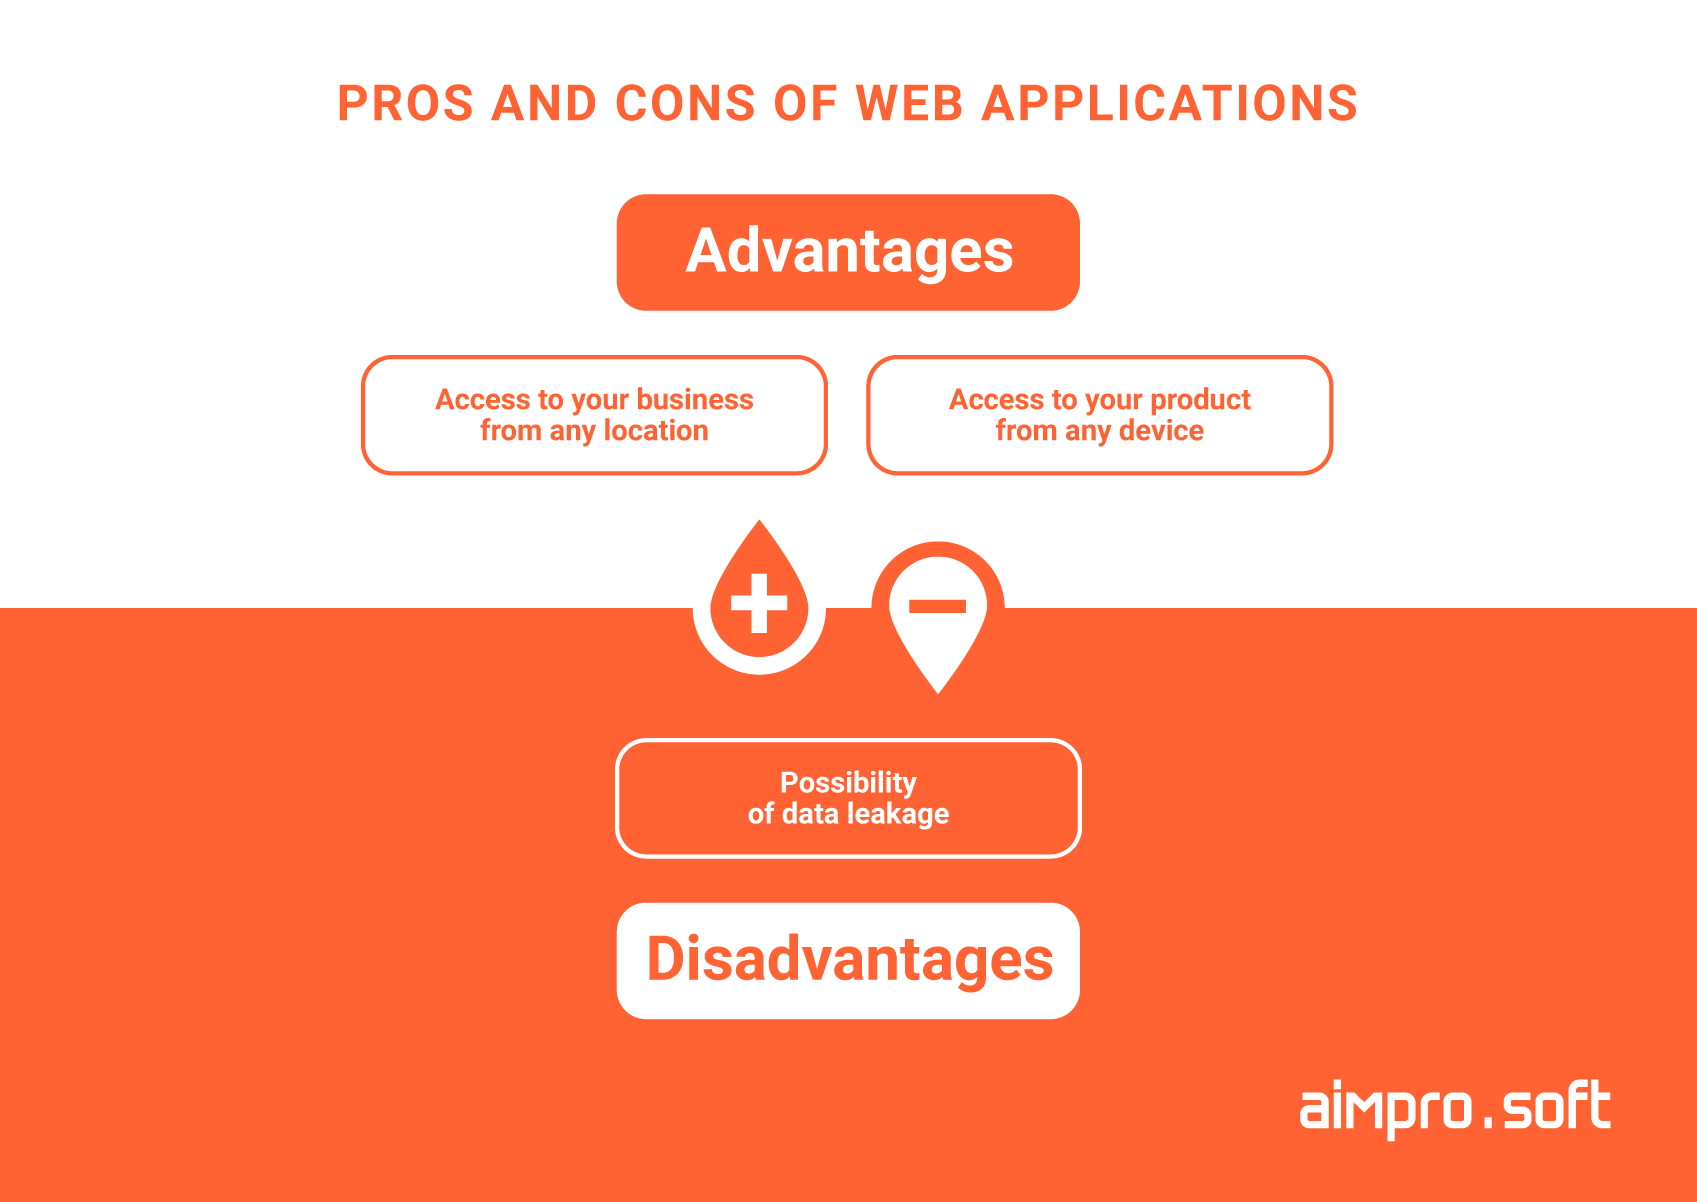 Pros and cons of web applications